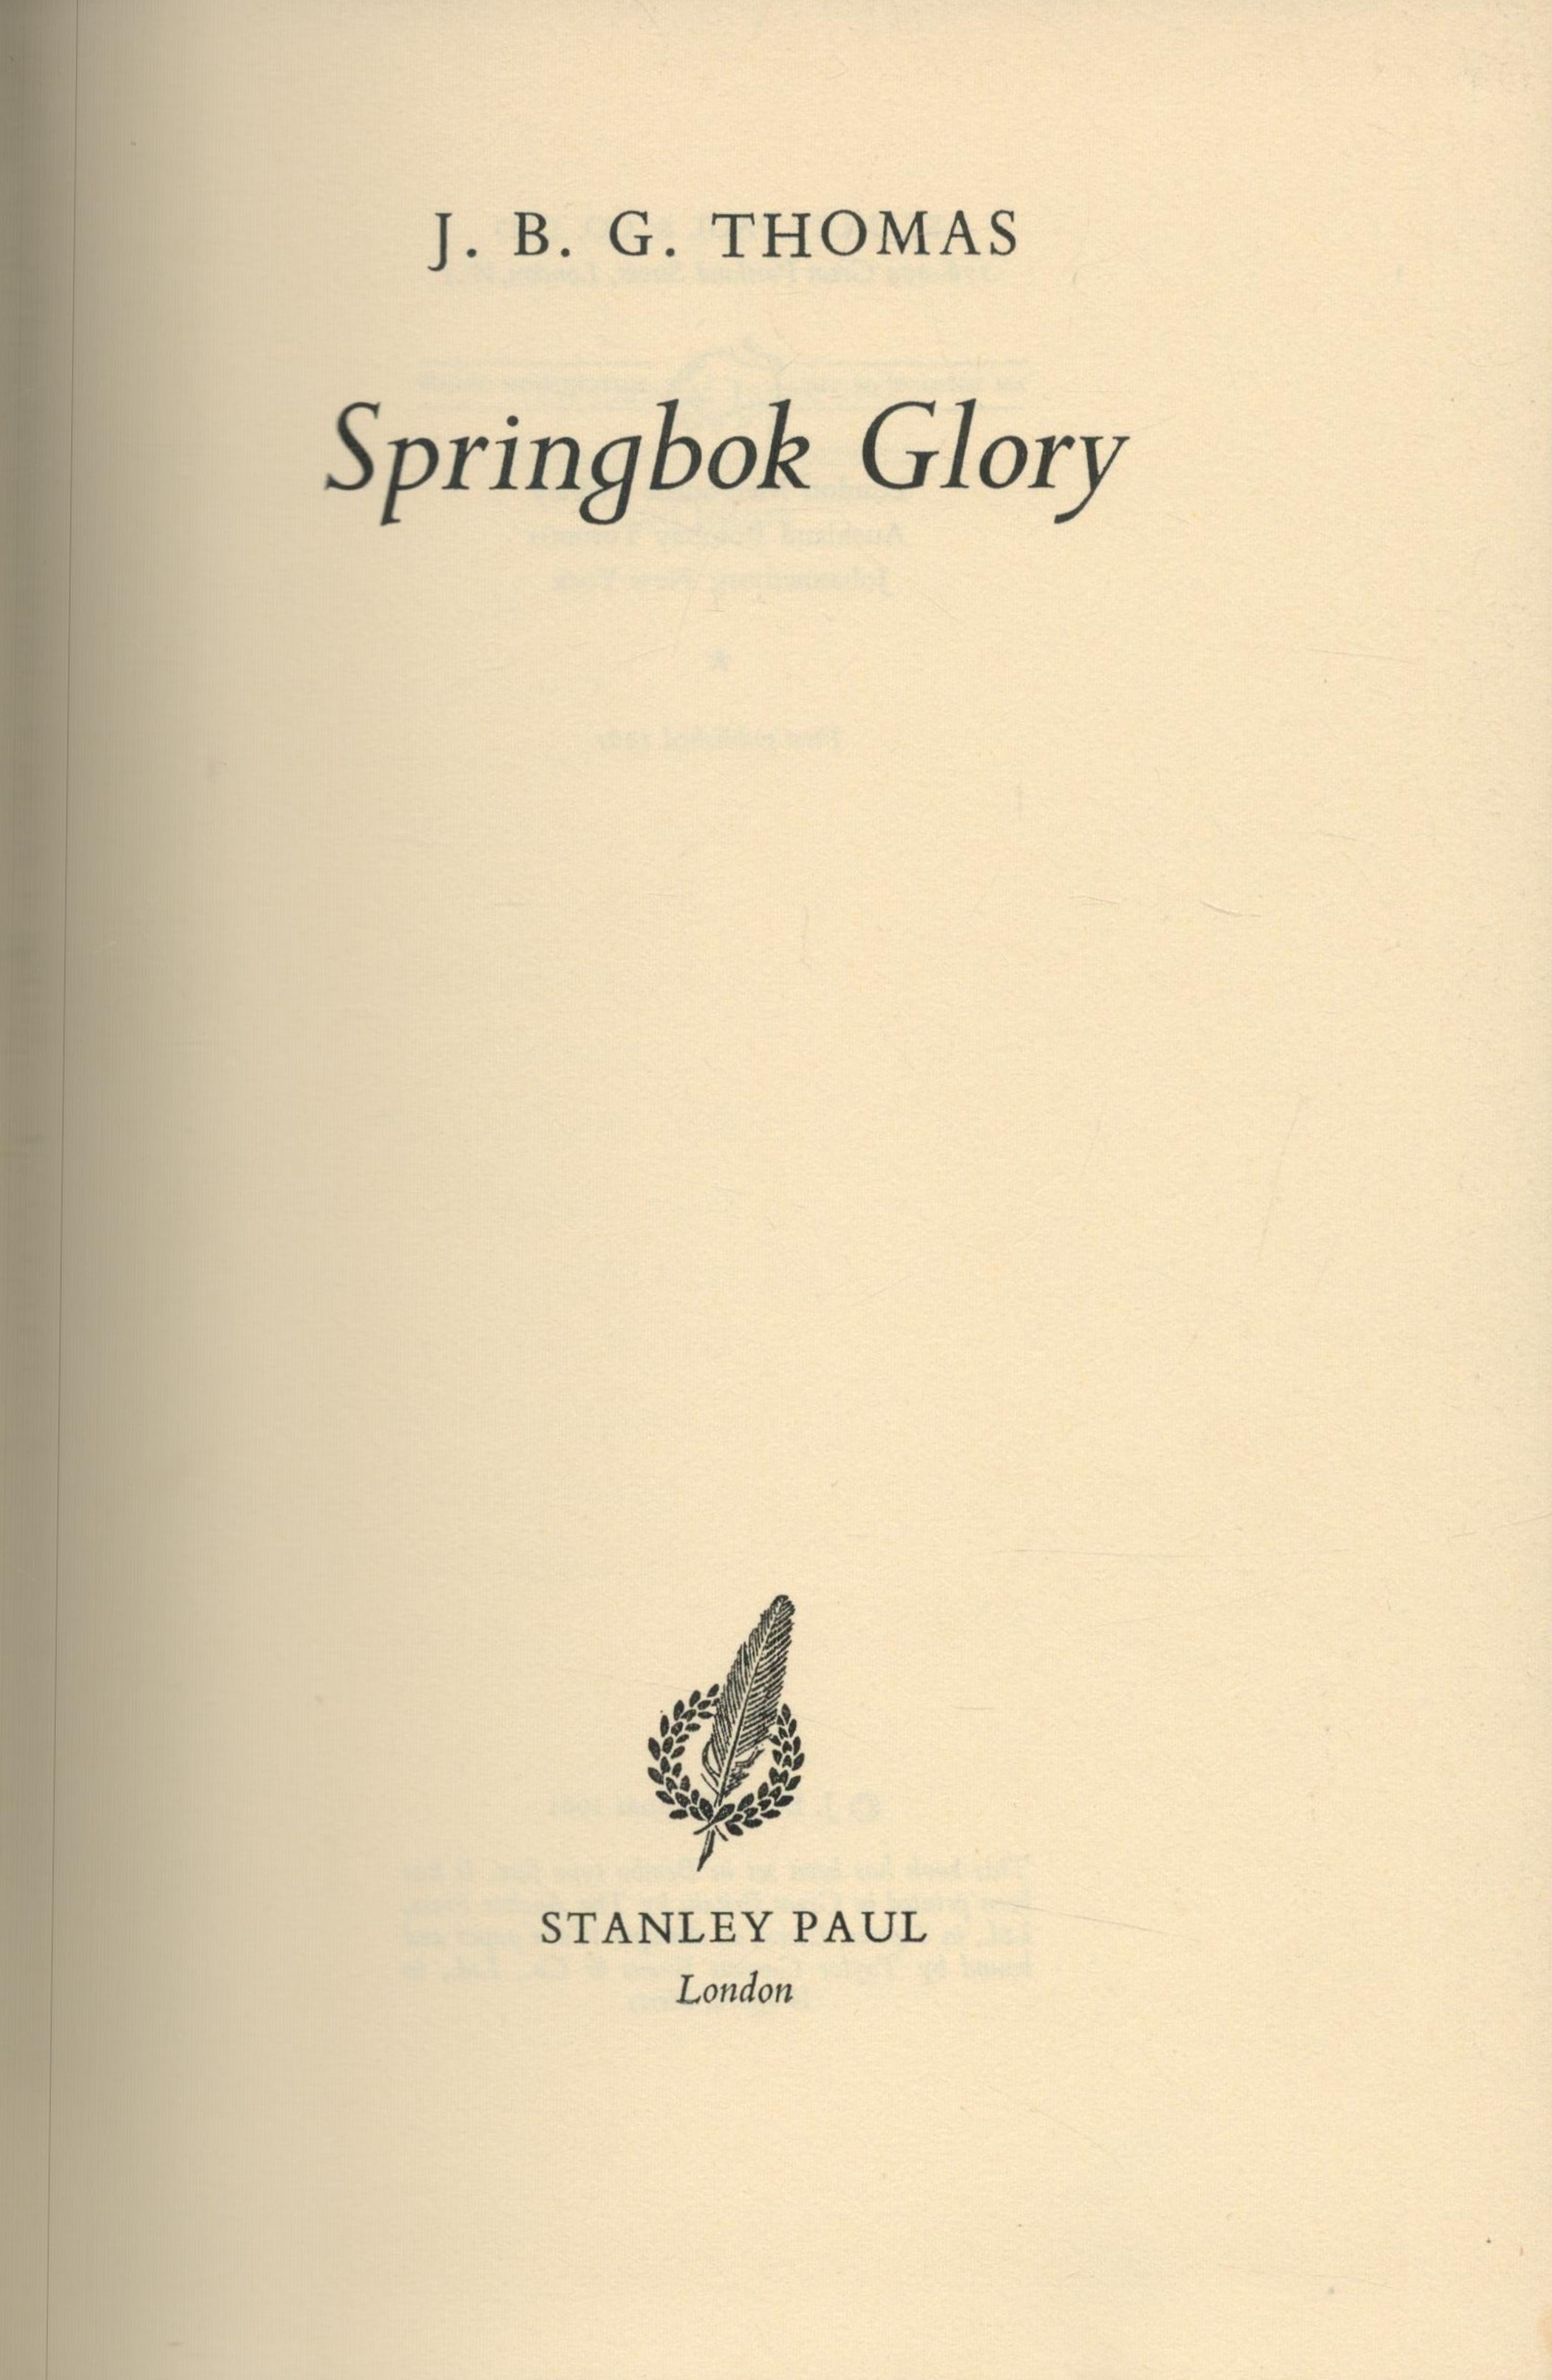 Springbok glory by J B G Thomas hardback book. Some damage to dustjacket. UNSIGNED. Good condition - Image 2 of 3